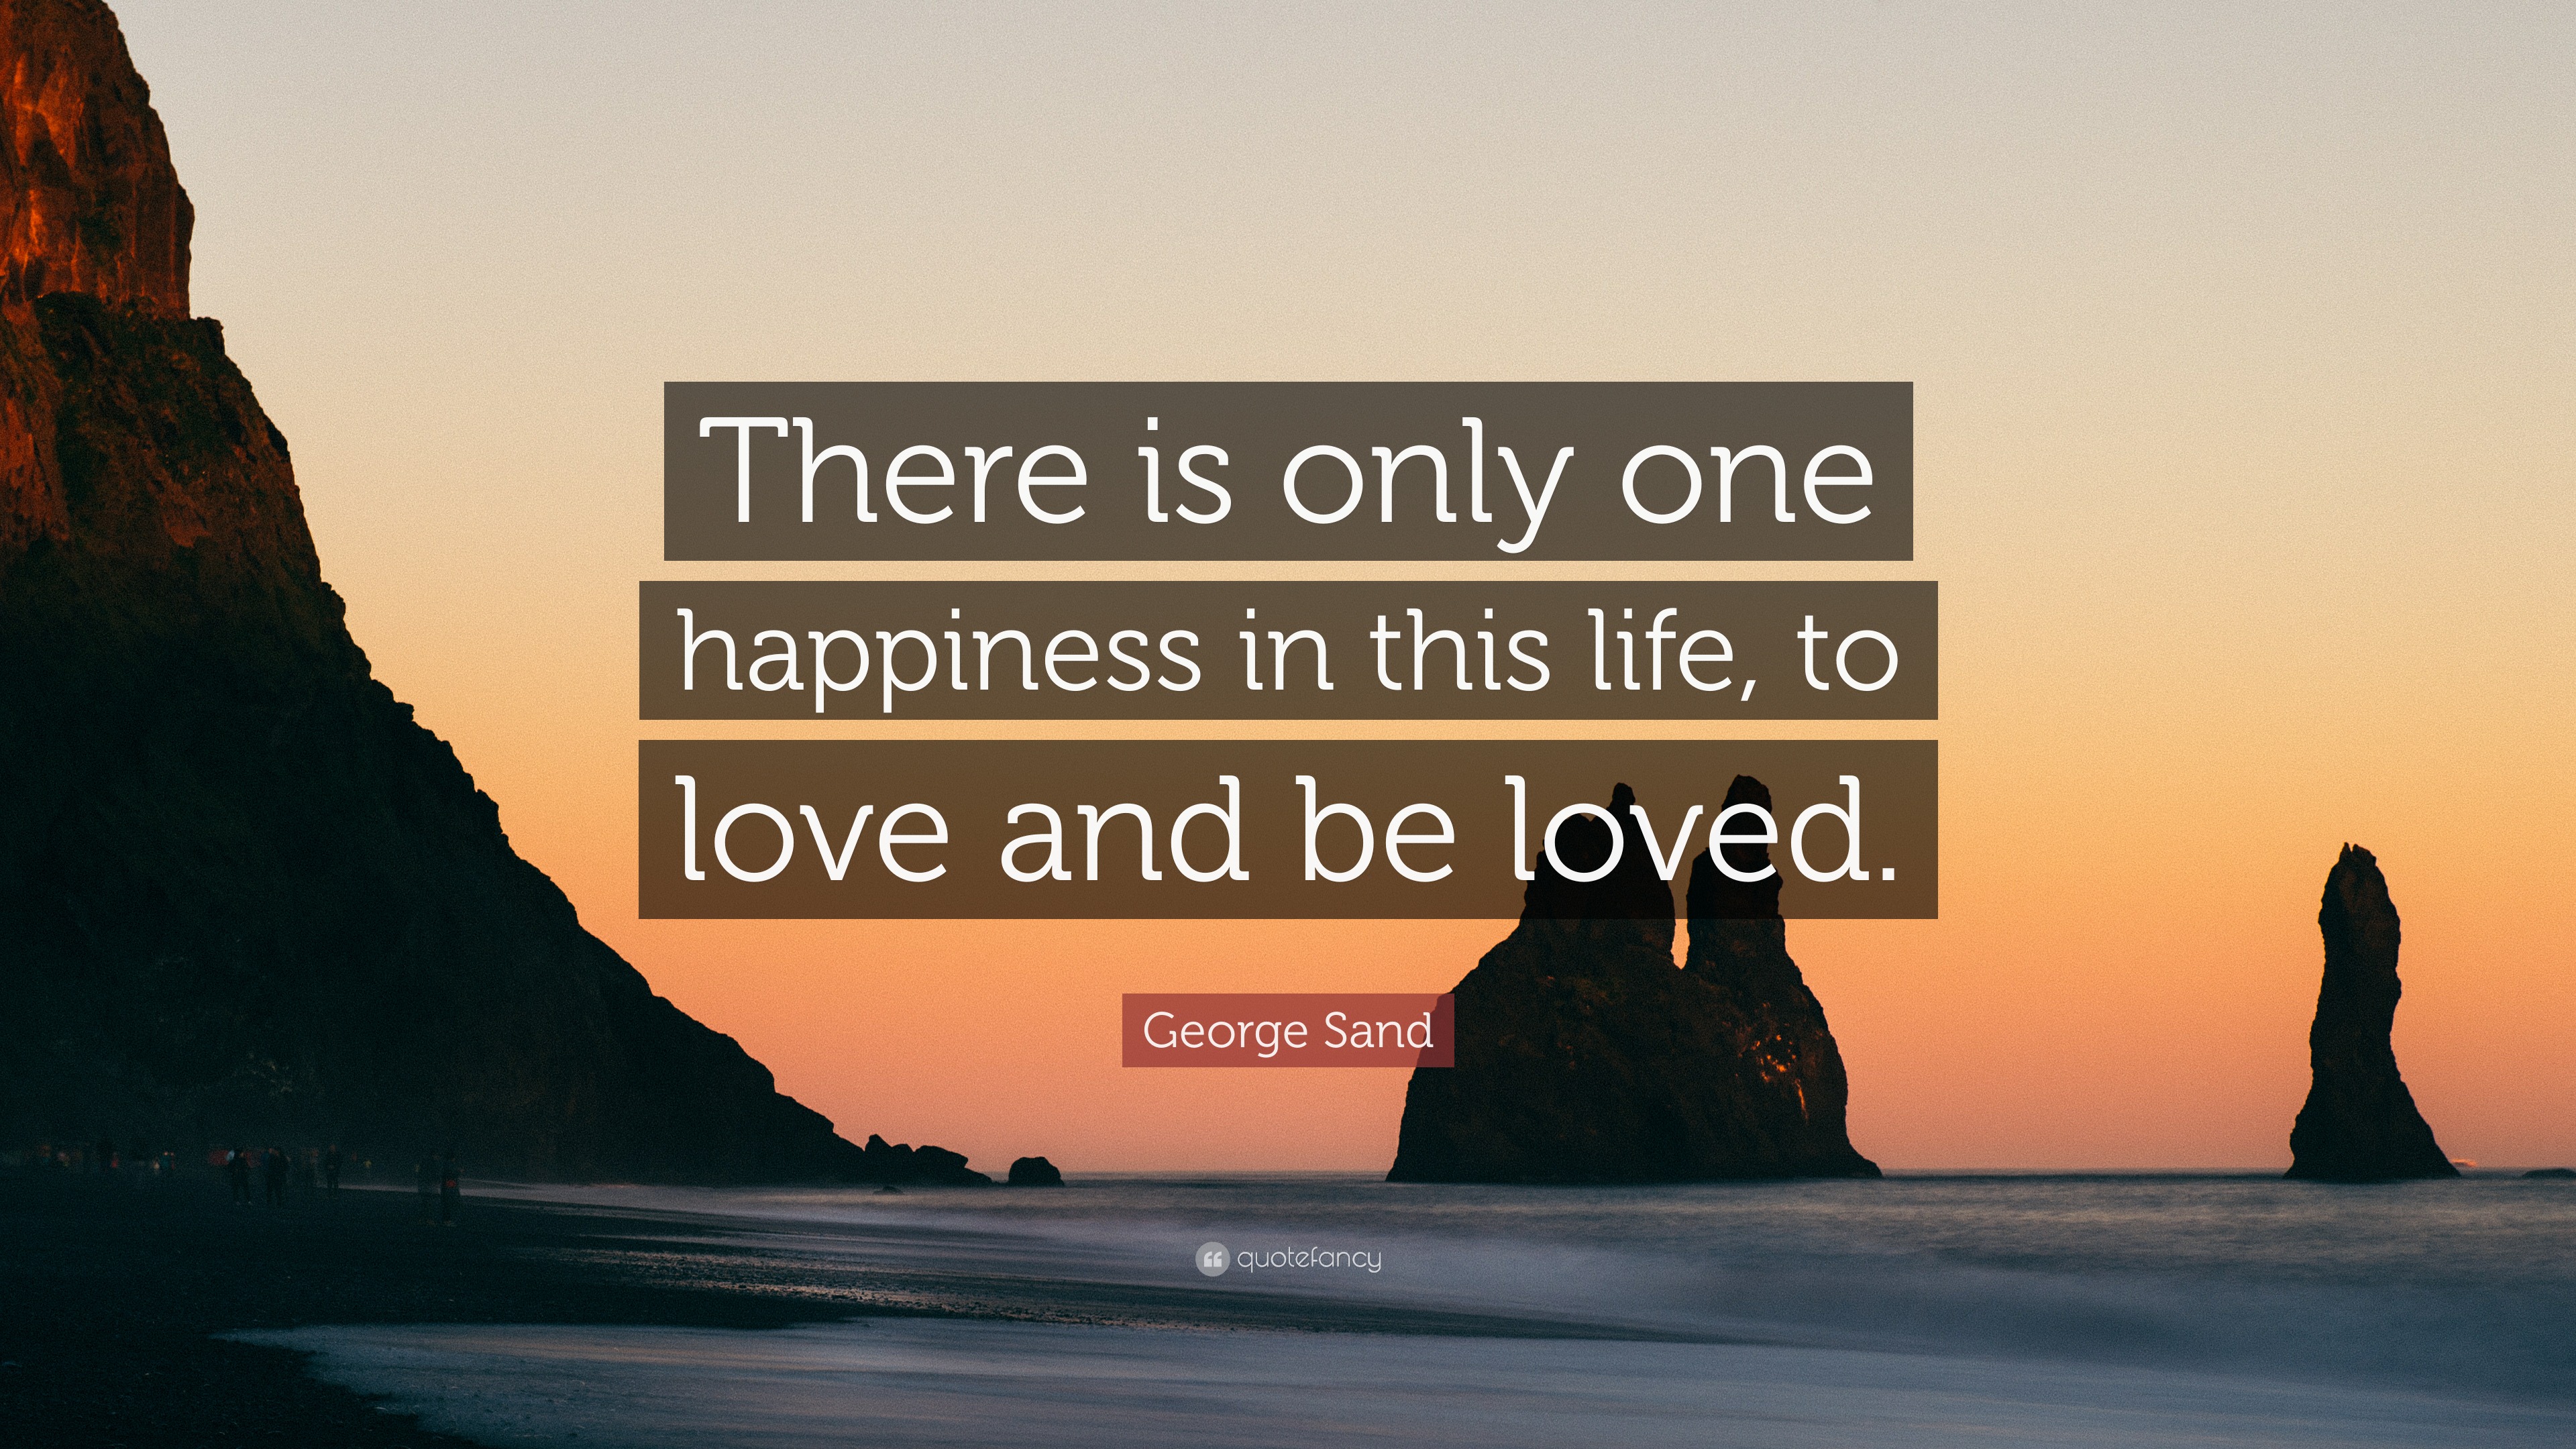 George Sand Quote: “There is only one happiness in this life, to love ...